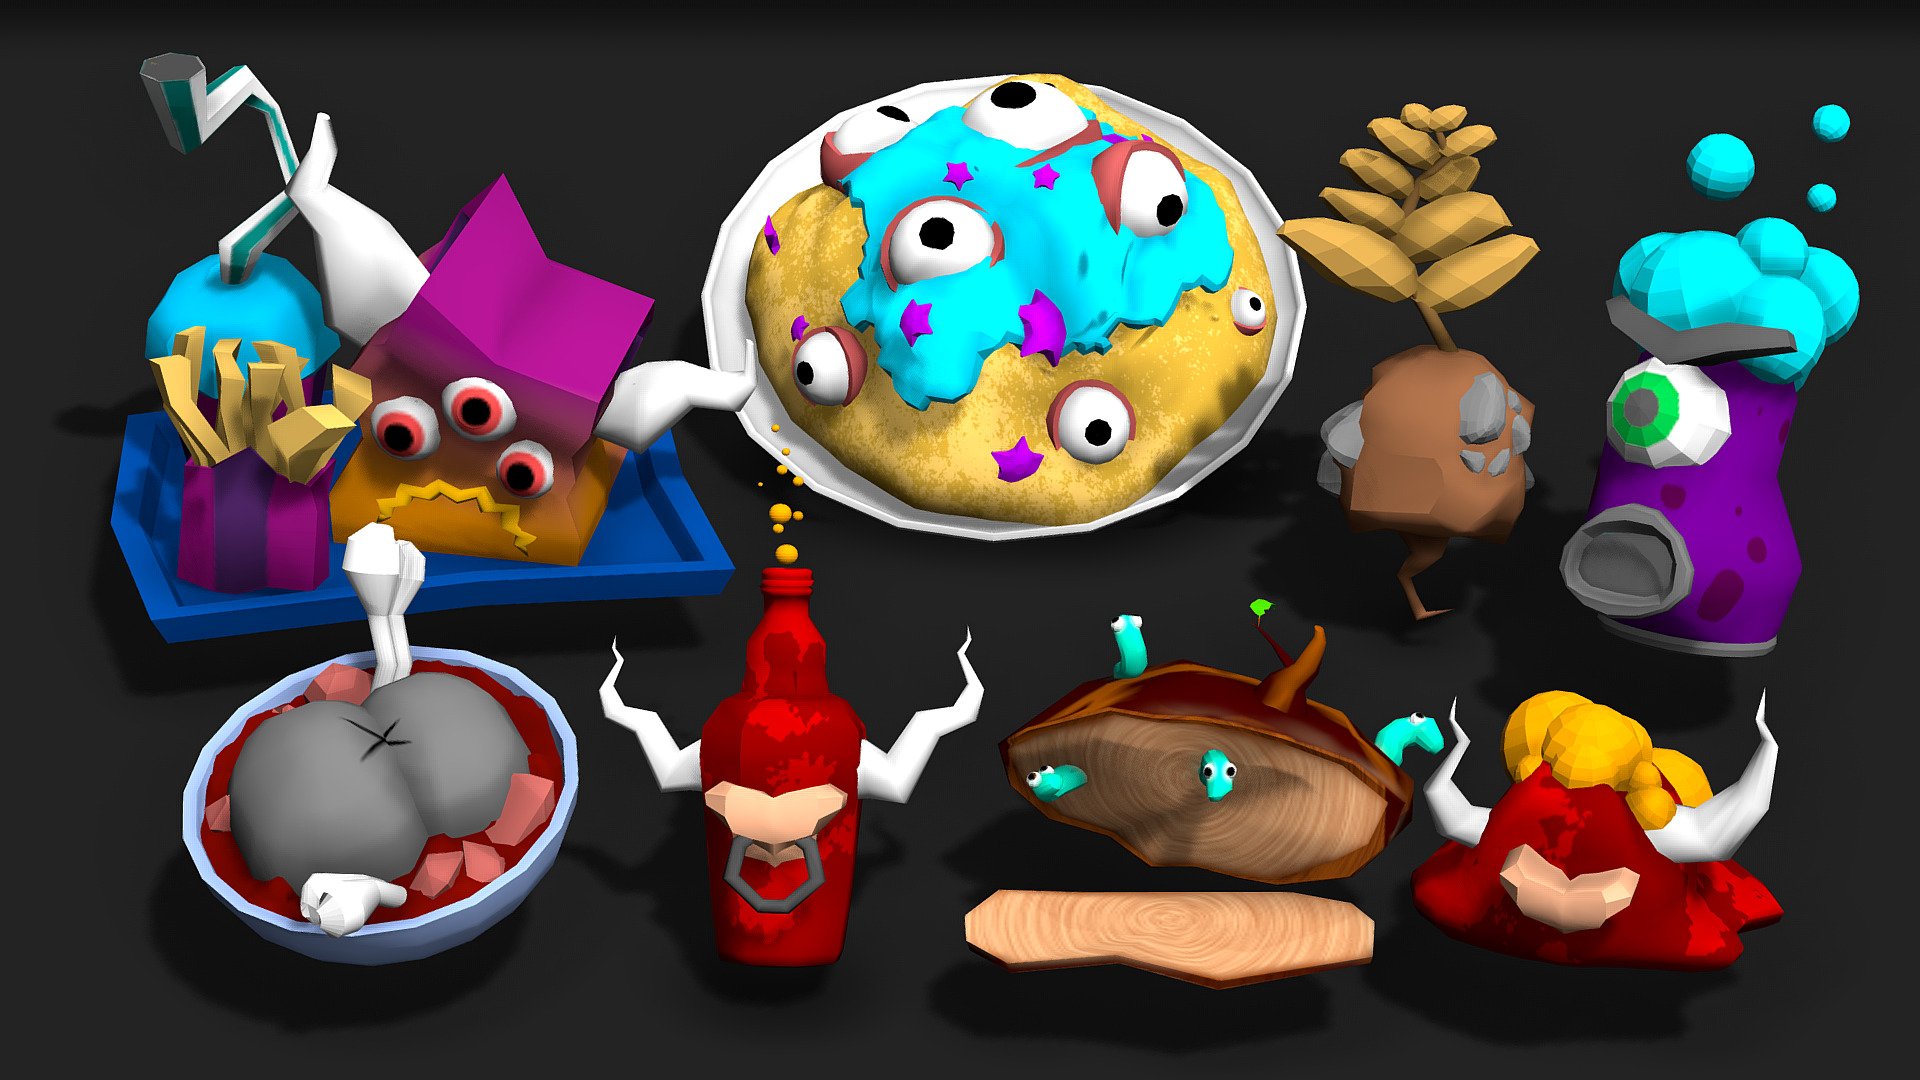 "Scoo-King" Game Assets